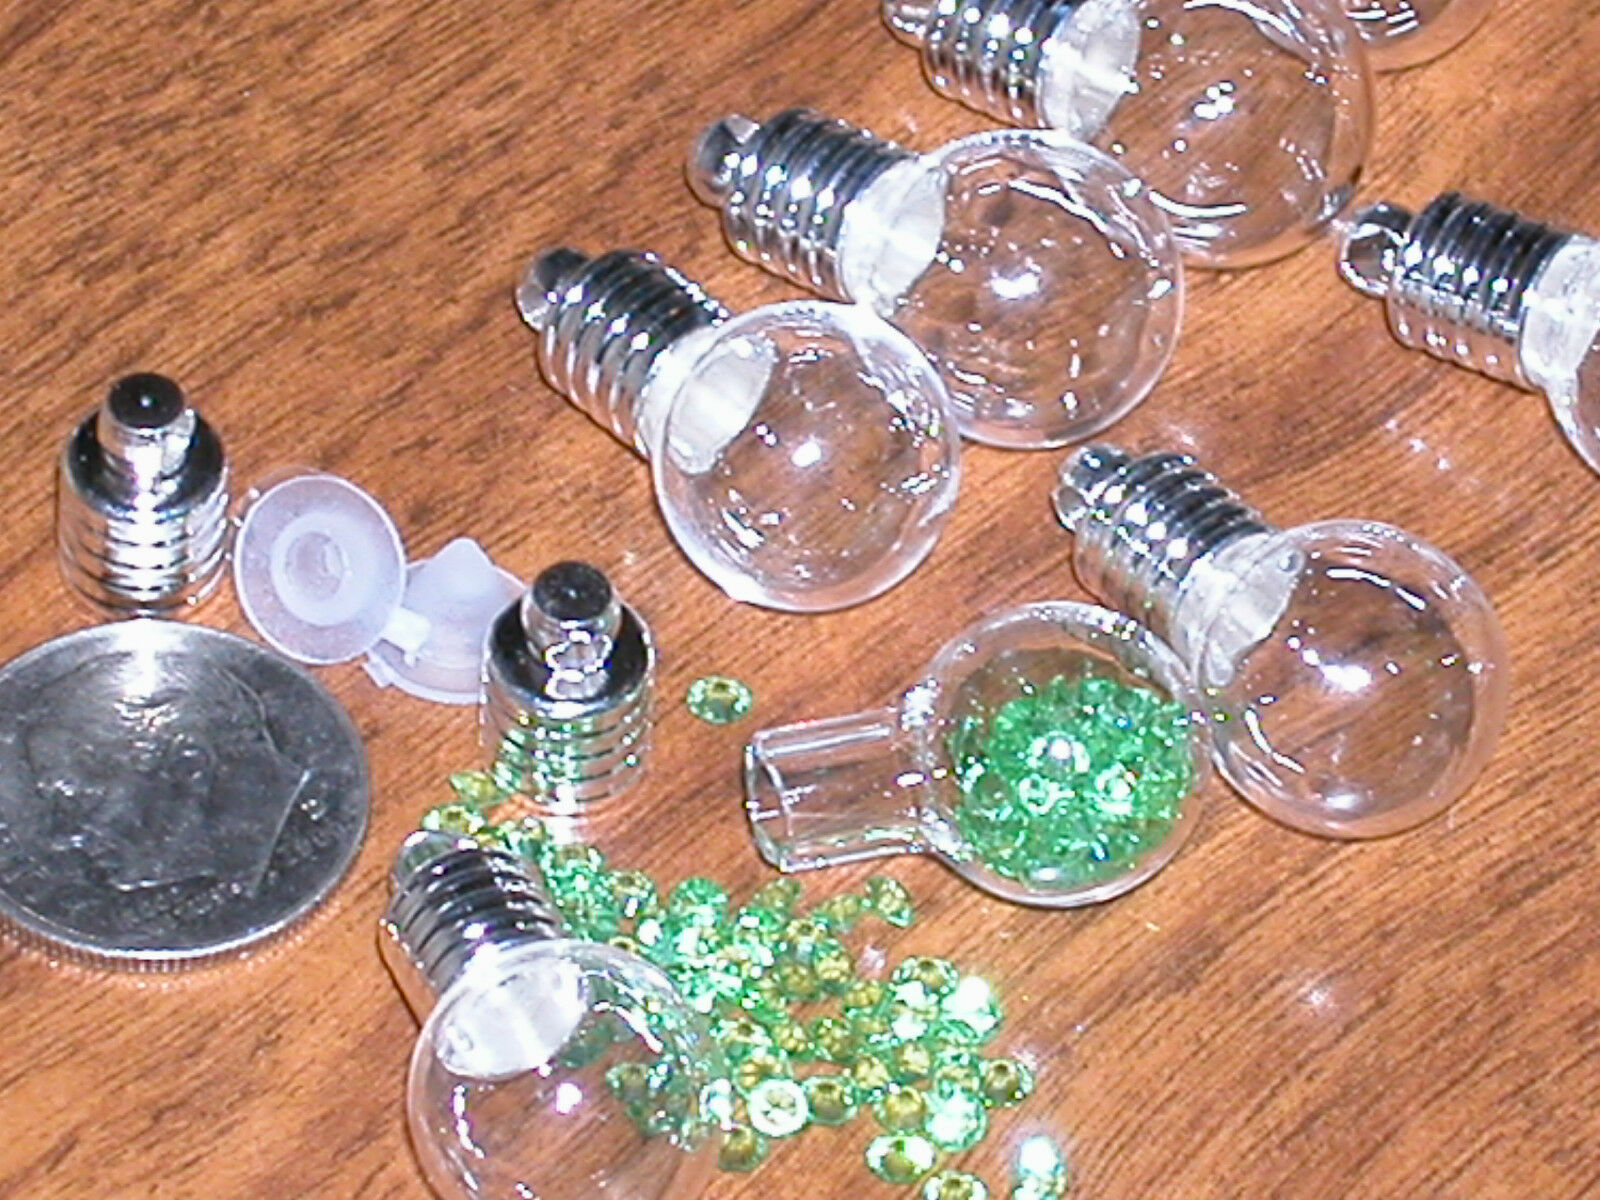 1 Glass Casting Spell Potion Wicca Chip Stones Magic Small Bottle Pendants Vials